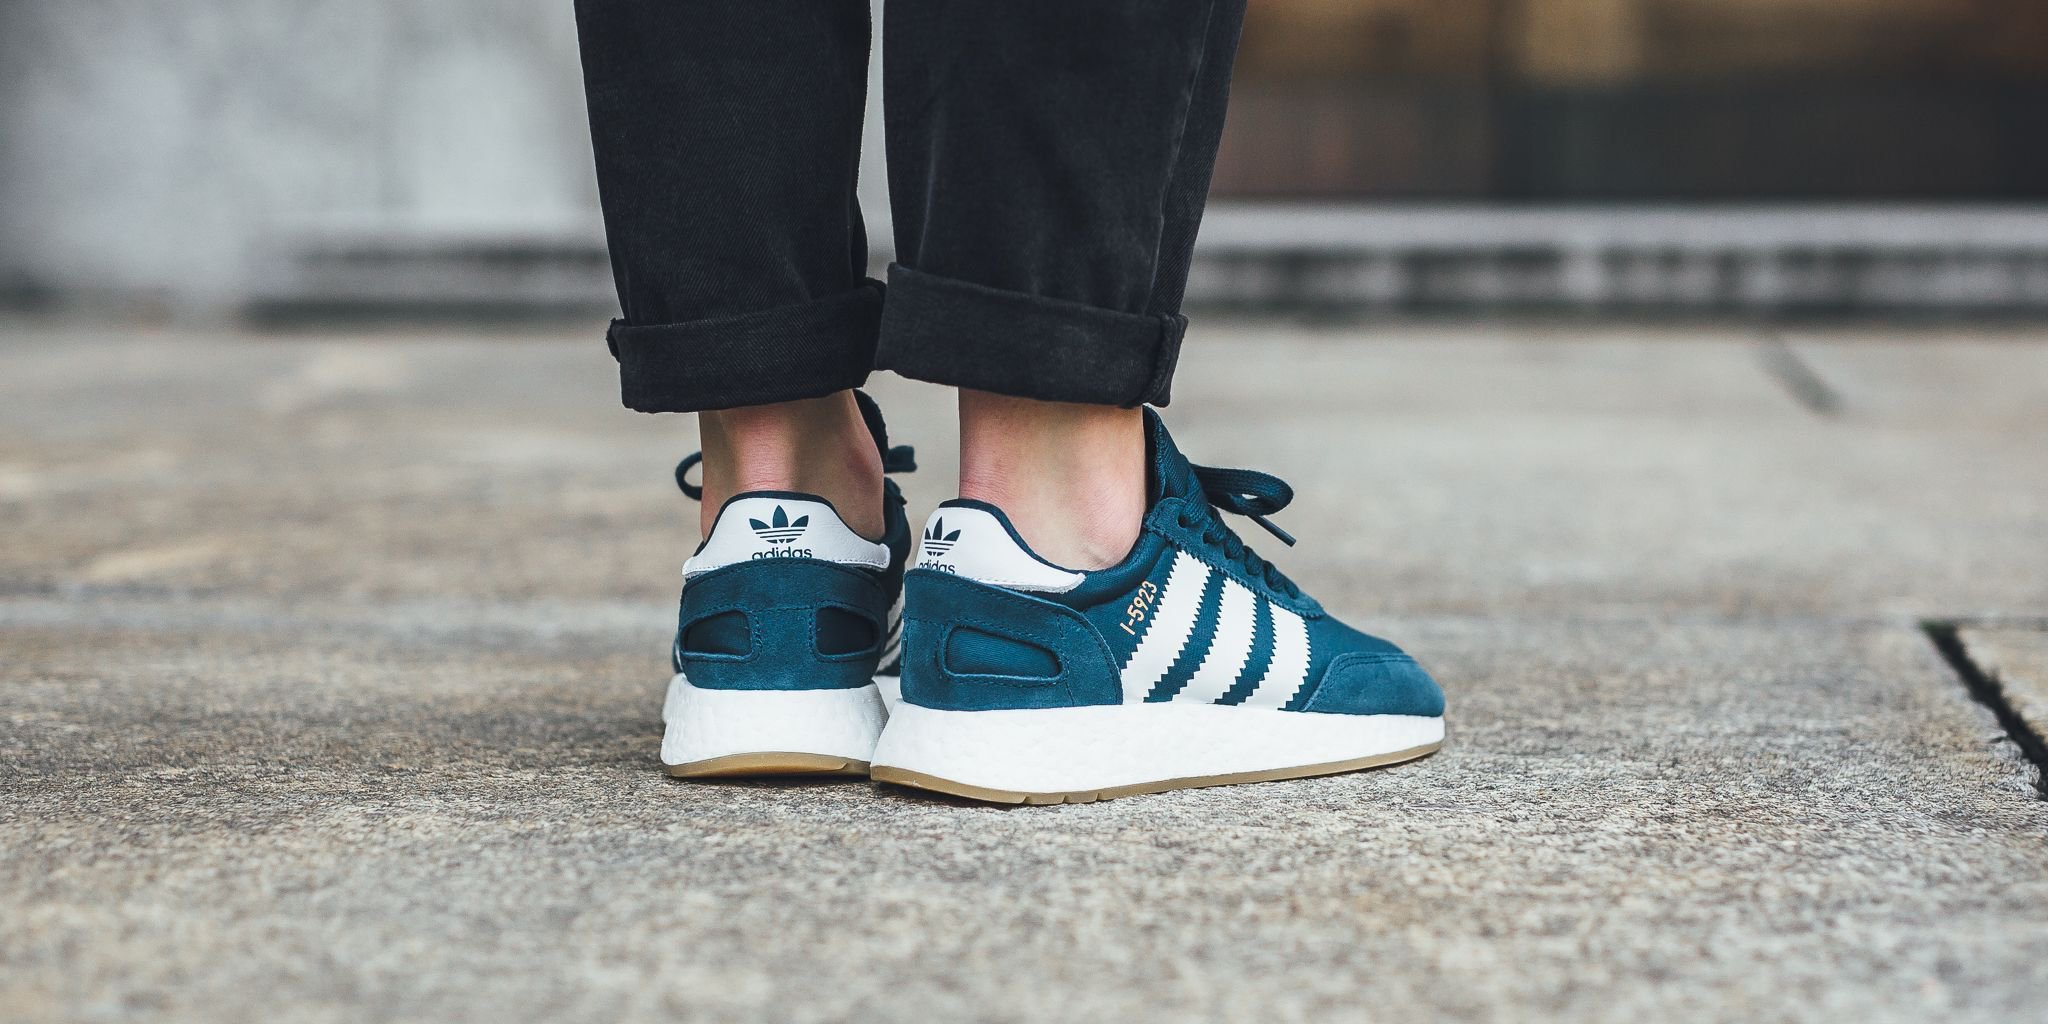 on Twitter: "ONLINE NOW ❗️Adidas I-5923 🔹 Petrol Night/Footwear White/Gum SHOP HERE ➡️ https://t.co/bAcI6wqM8R #adidas #adidasi5923 #i5923 #petrol https://t.co/PhJAG1SpnI" / Twitter